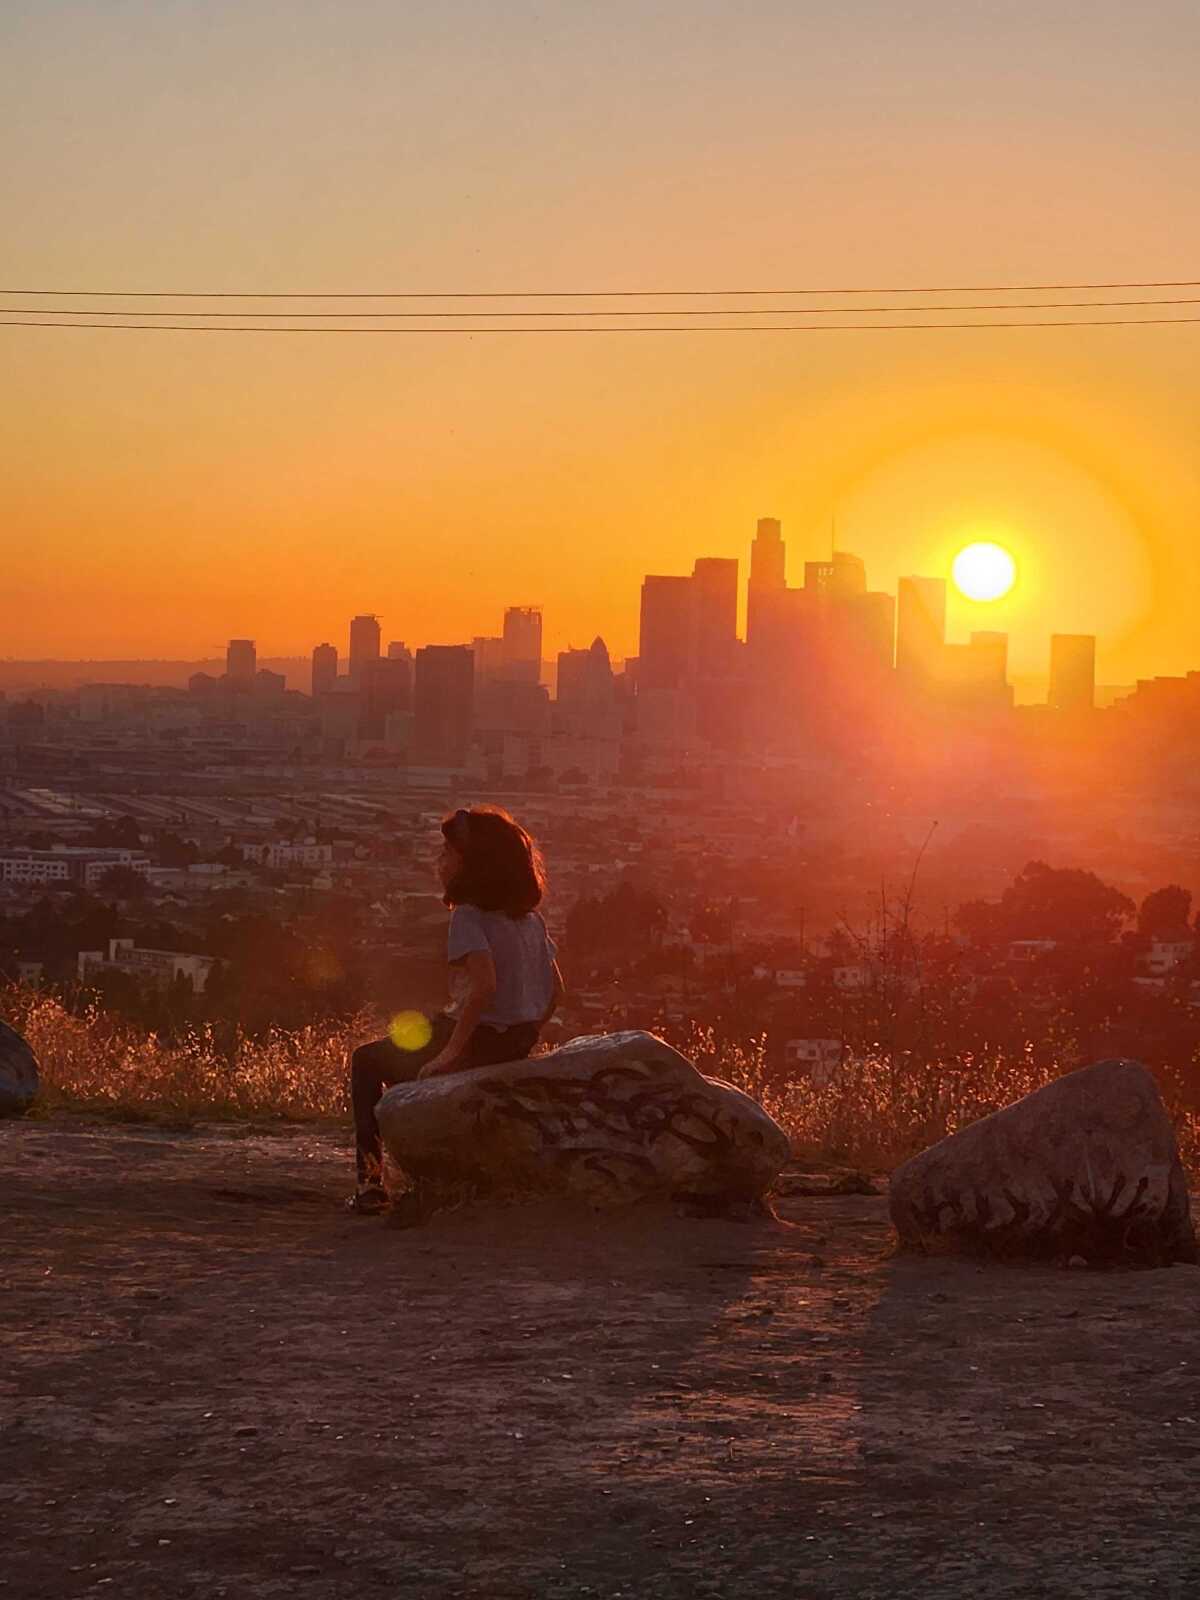 A little girl sits on the edge of a rock with the sunset and L.A. skyline in the background